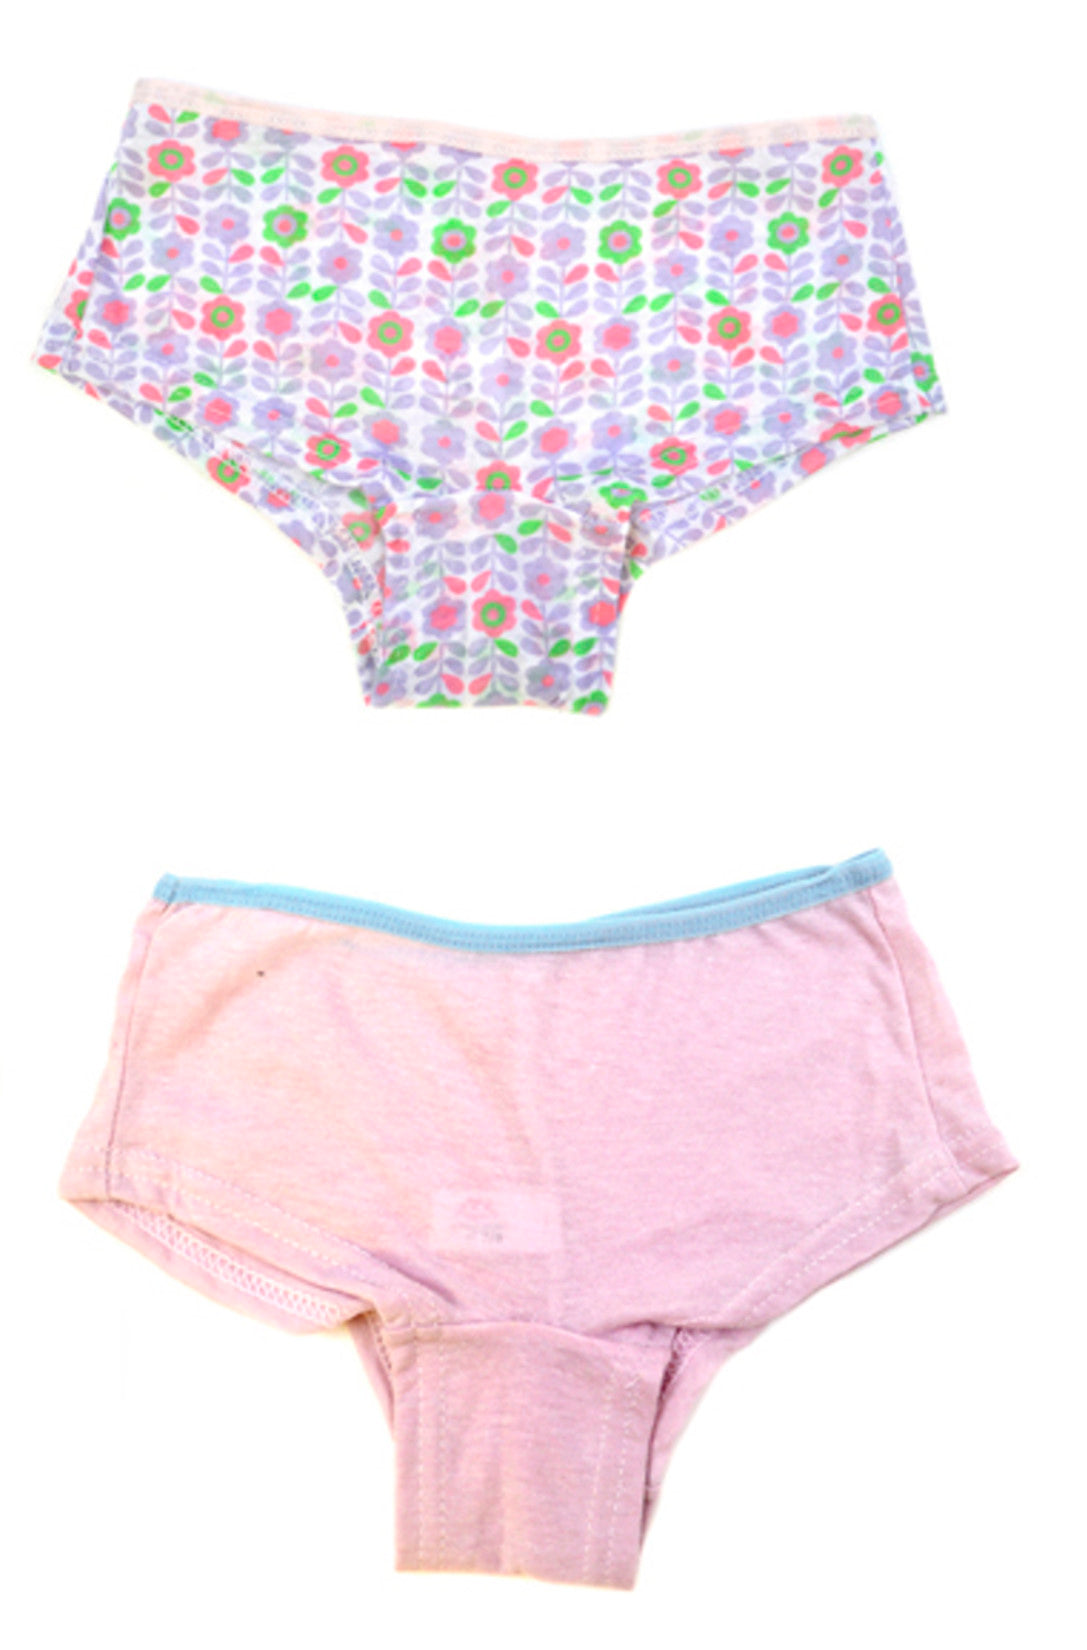 Girls 4 Pack Patterned Boxer Short Knickers